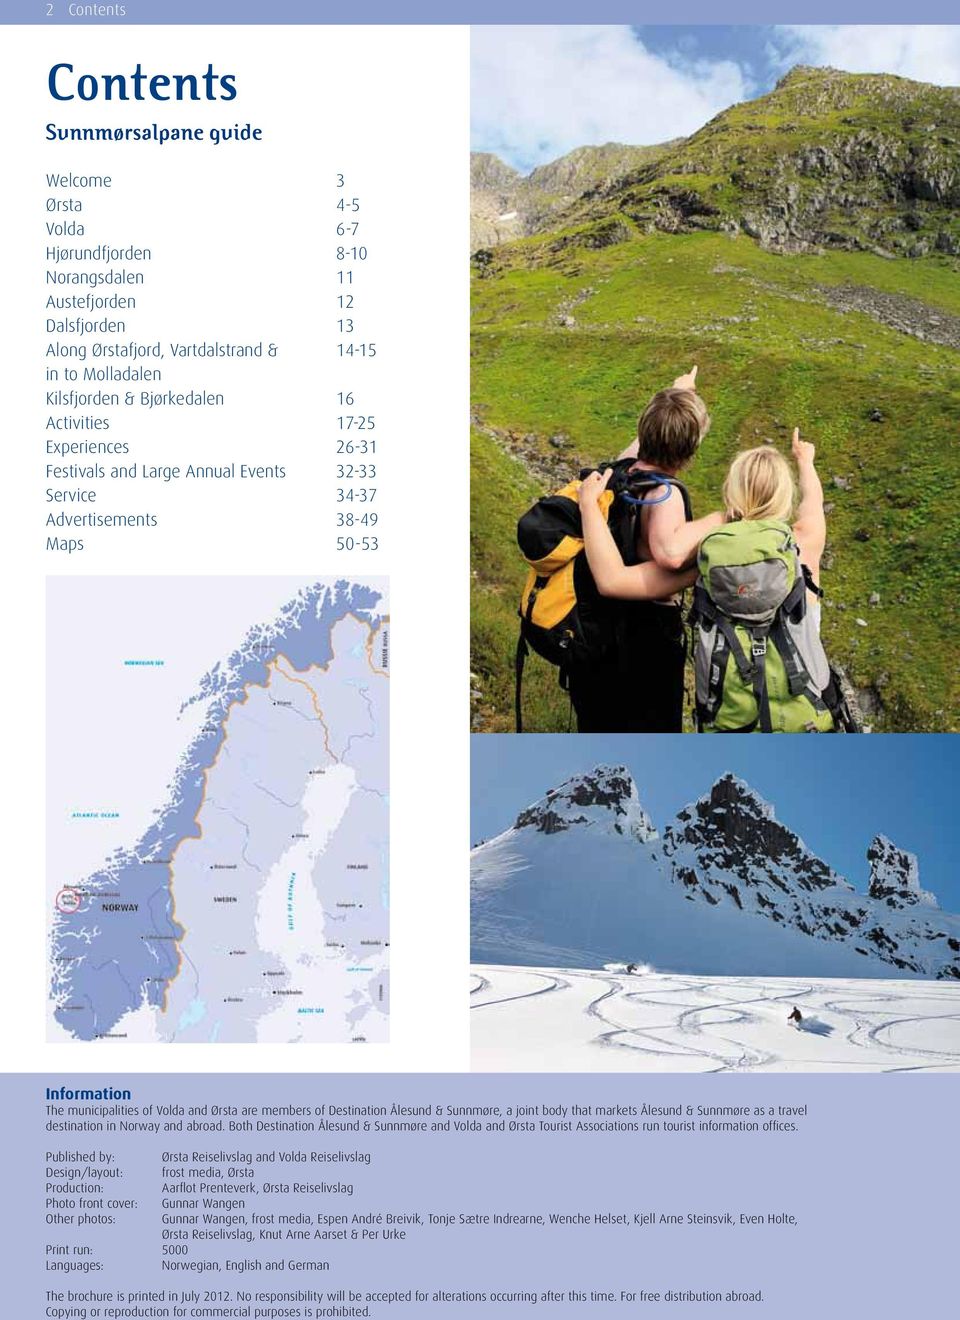 Maps 50-53 Information The municipalities of Volda and Ørsta are members of Destination Ålesund & Sunnmøre, a joint body that markets Ålesund & Sunnmøre as a travel destination in Norway and abroad.